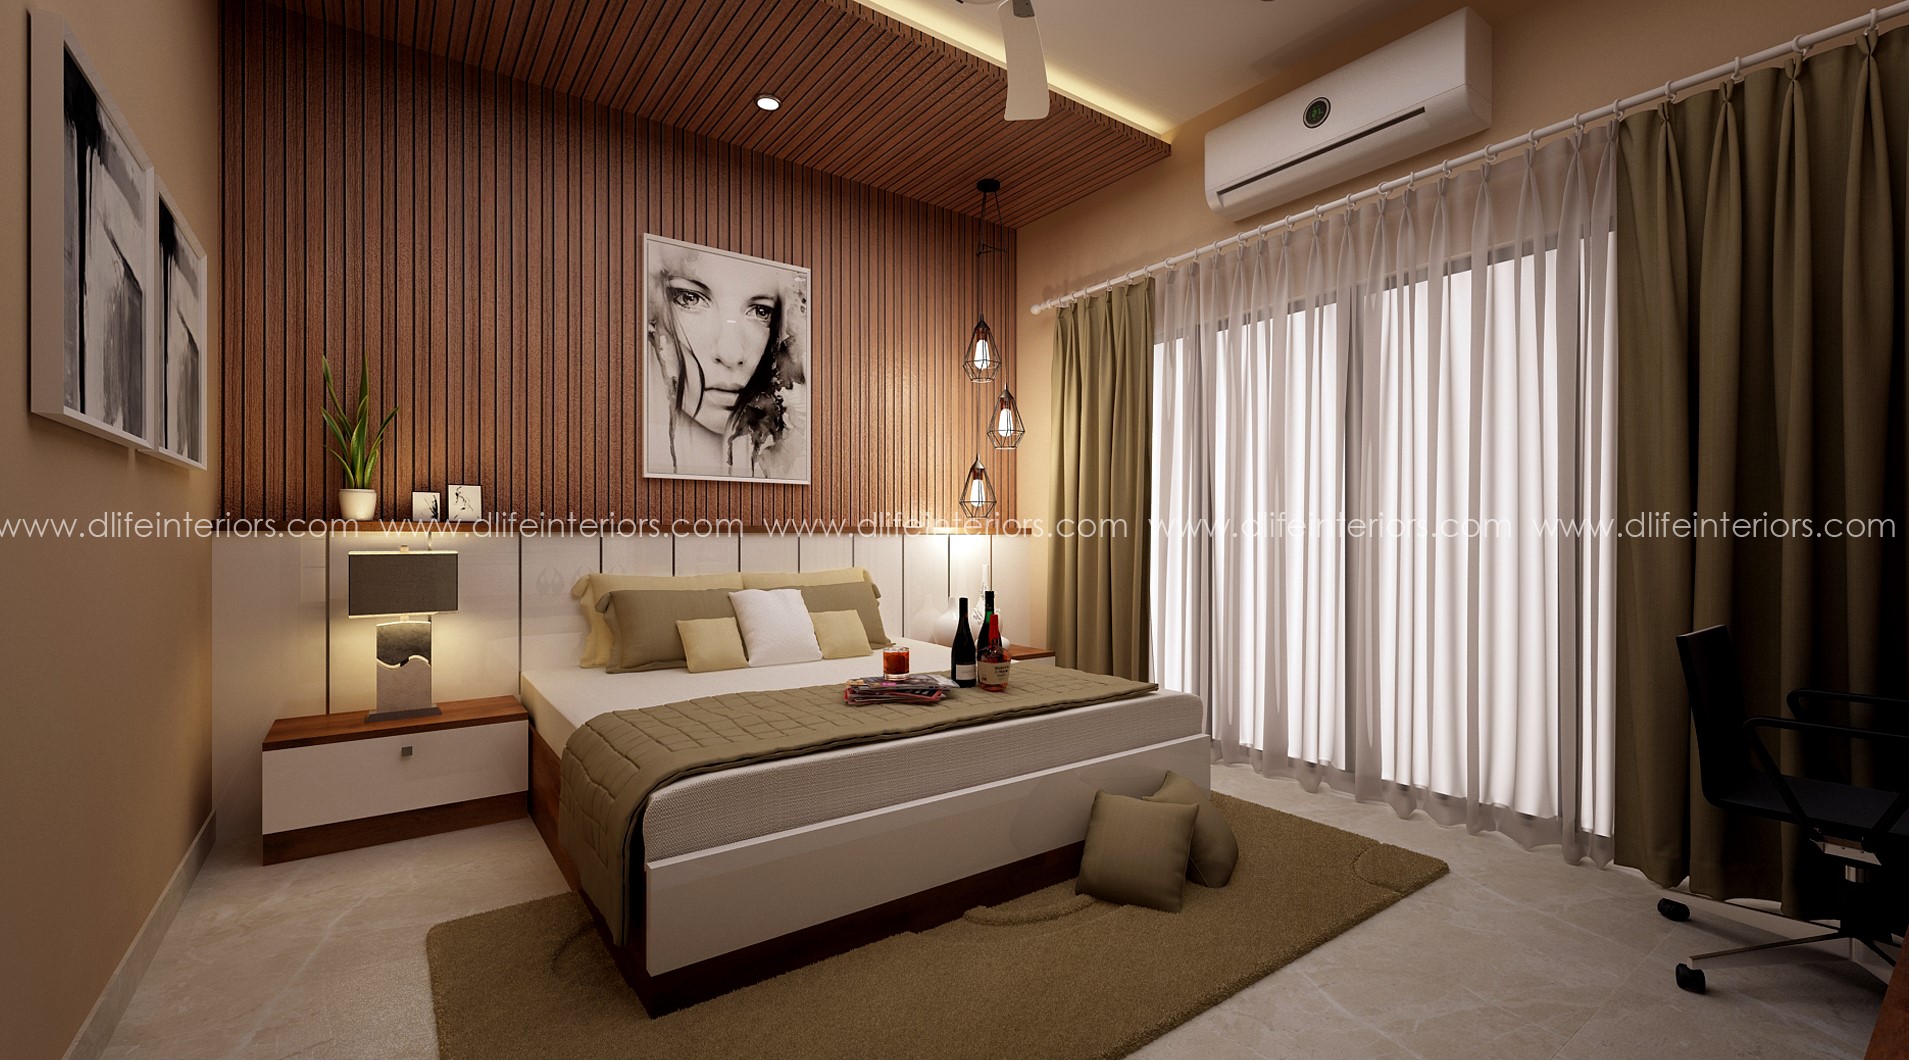 Bedroom interiors Kerala with king size bed and bedside tables